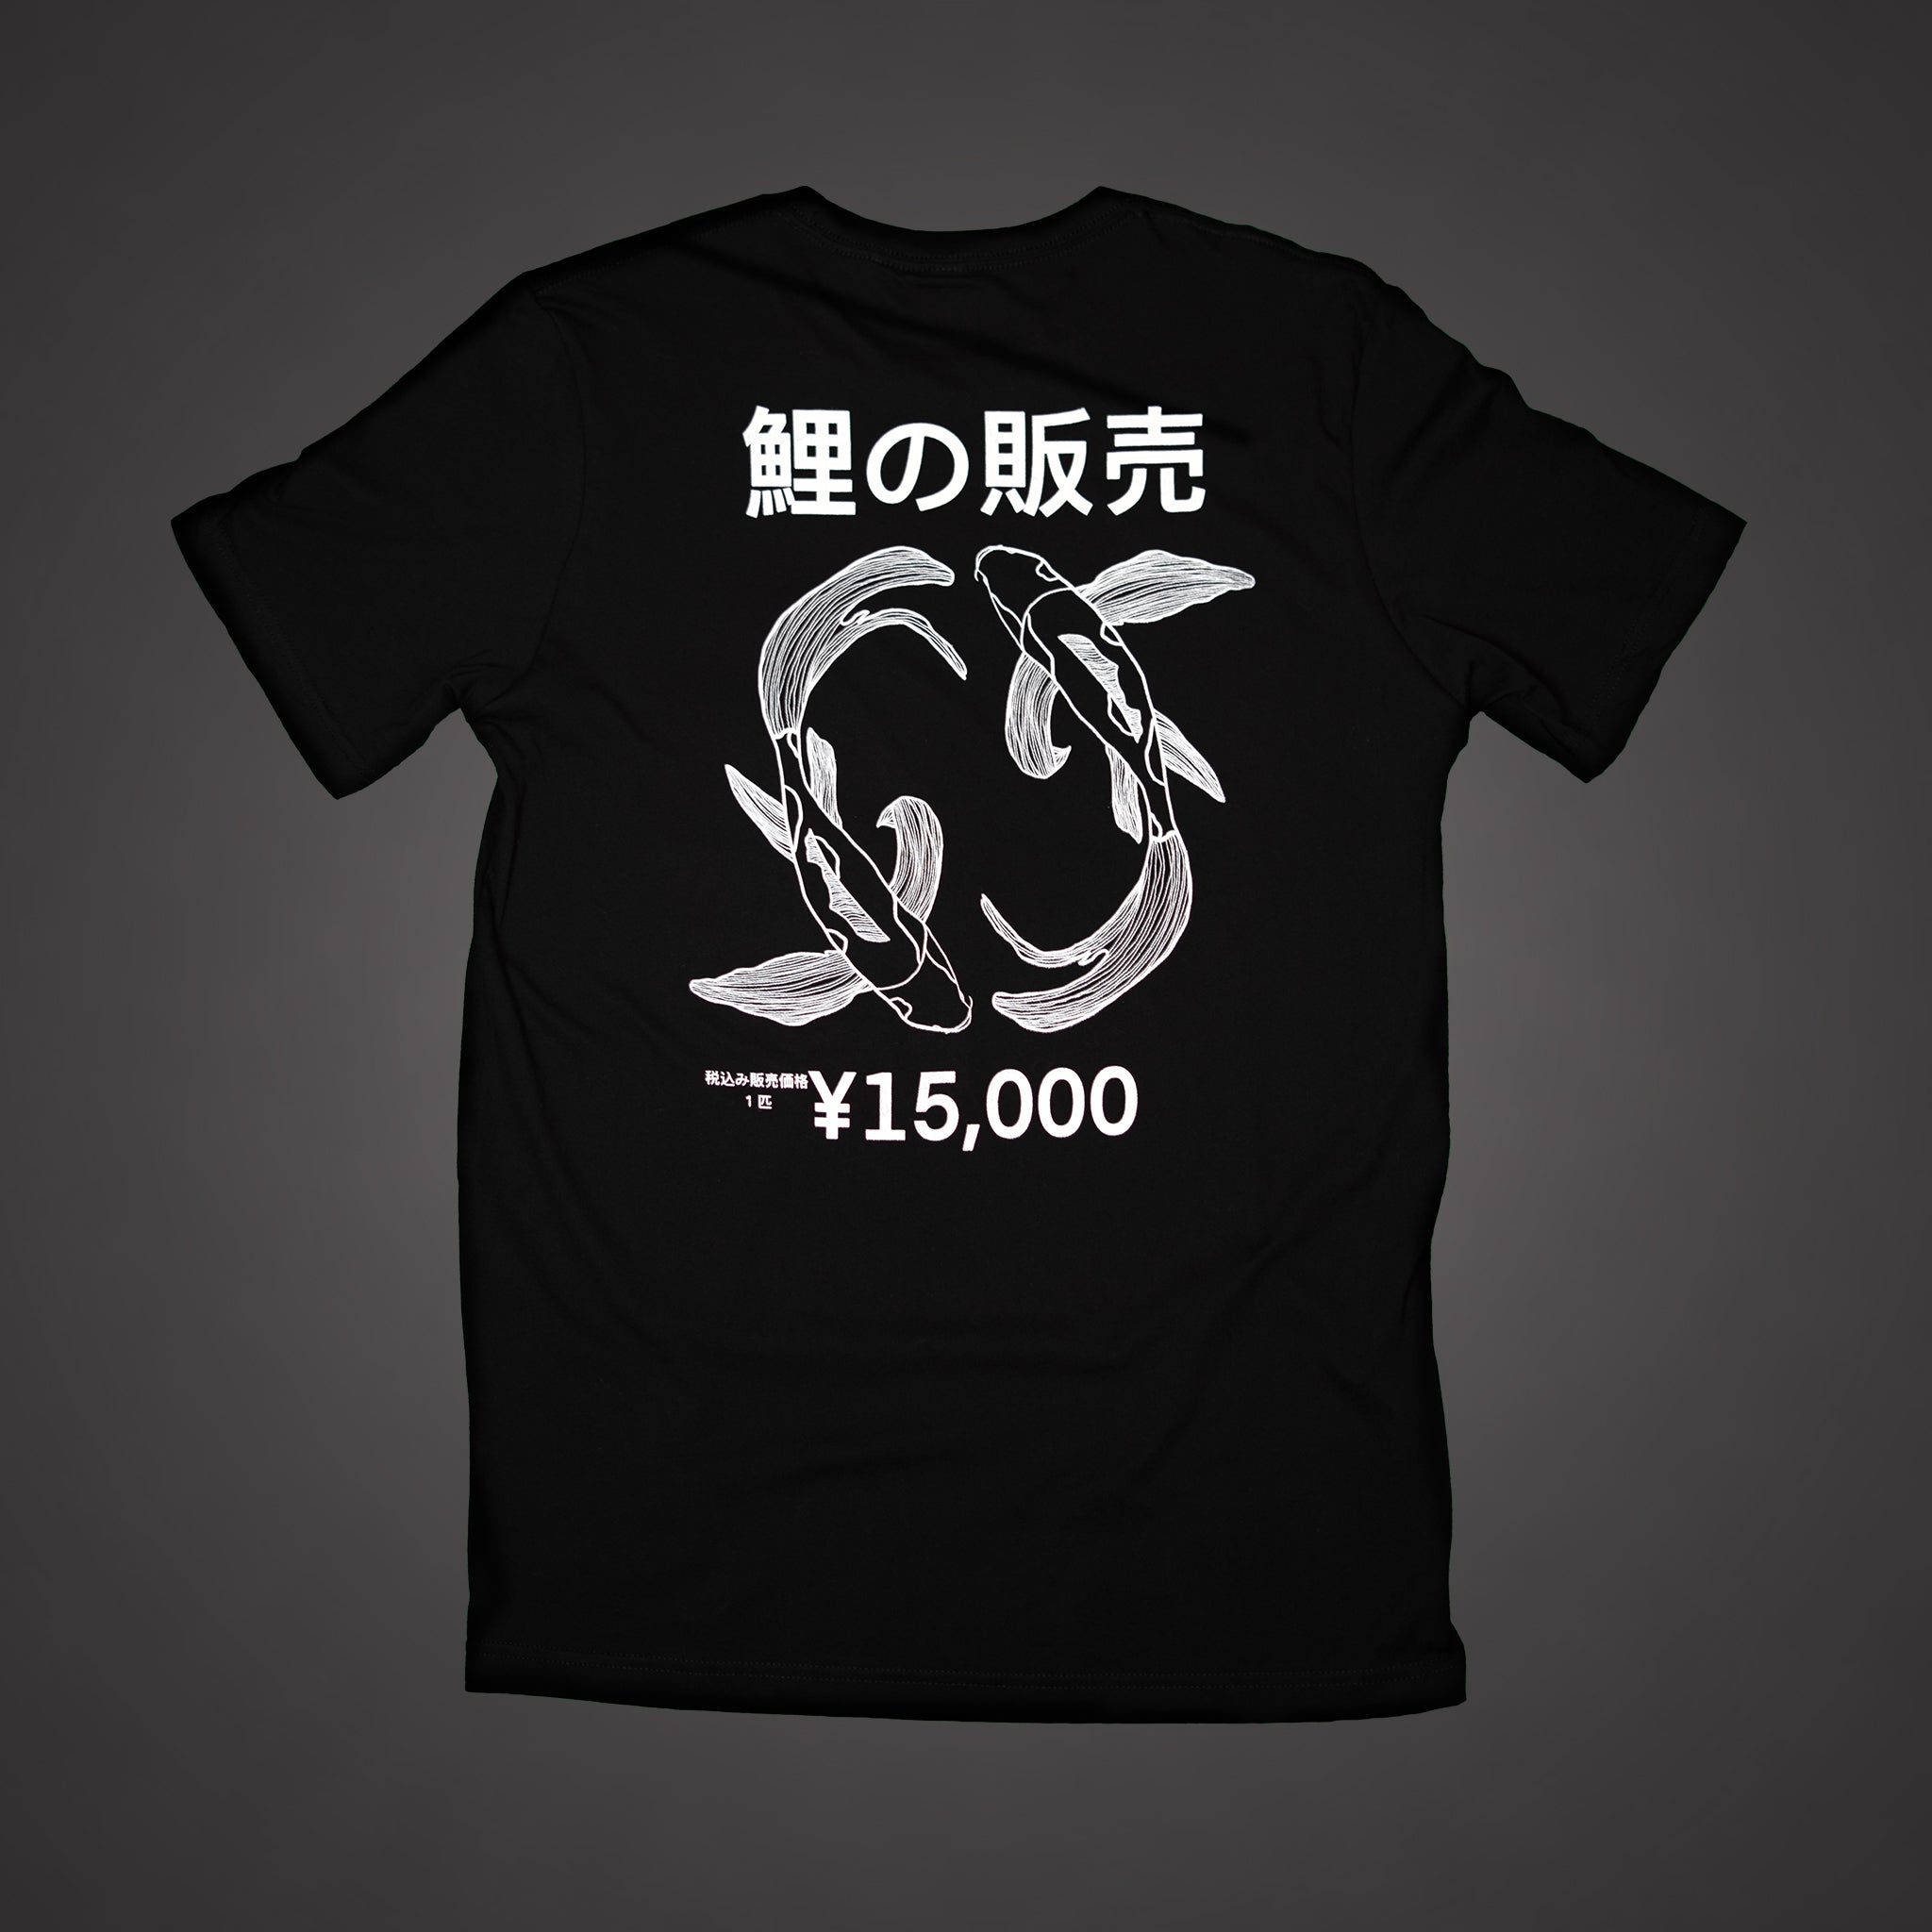 Black Shirt with White ink design which includes two Koi Fish and Japanese text